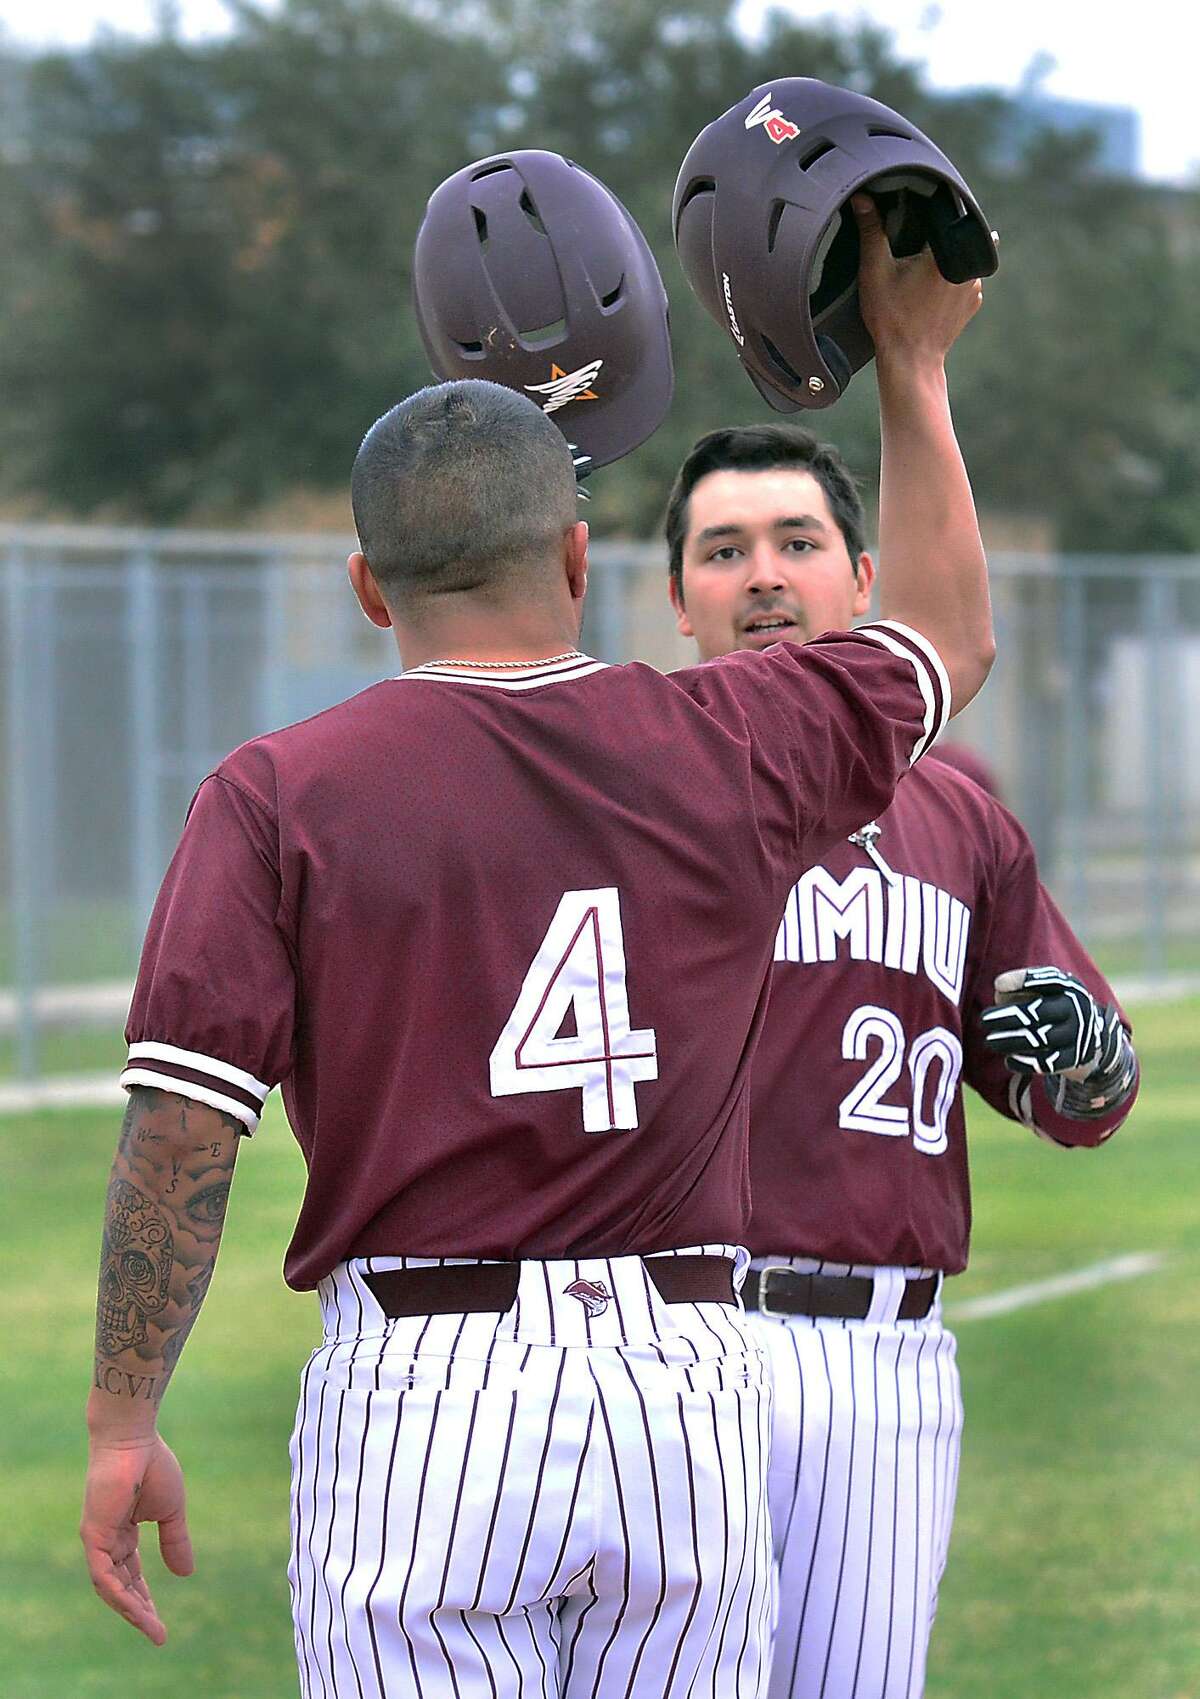 TAMIU’s Sergio Pollorena (20) hit a two-run homer in the seventh and final inning for a 2-0 victory over St. Mary’s Thursday. The Dustdevils lost a 7-1 lead with nine outs to go in the opener and fell 8-7.